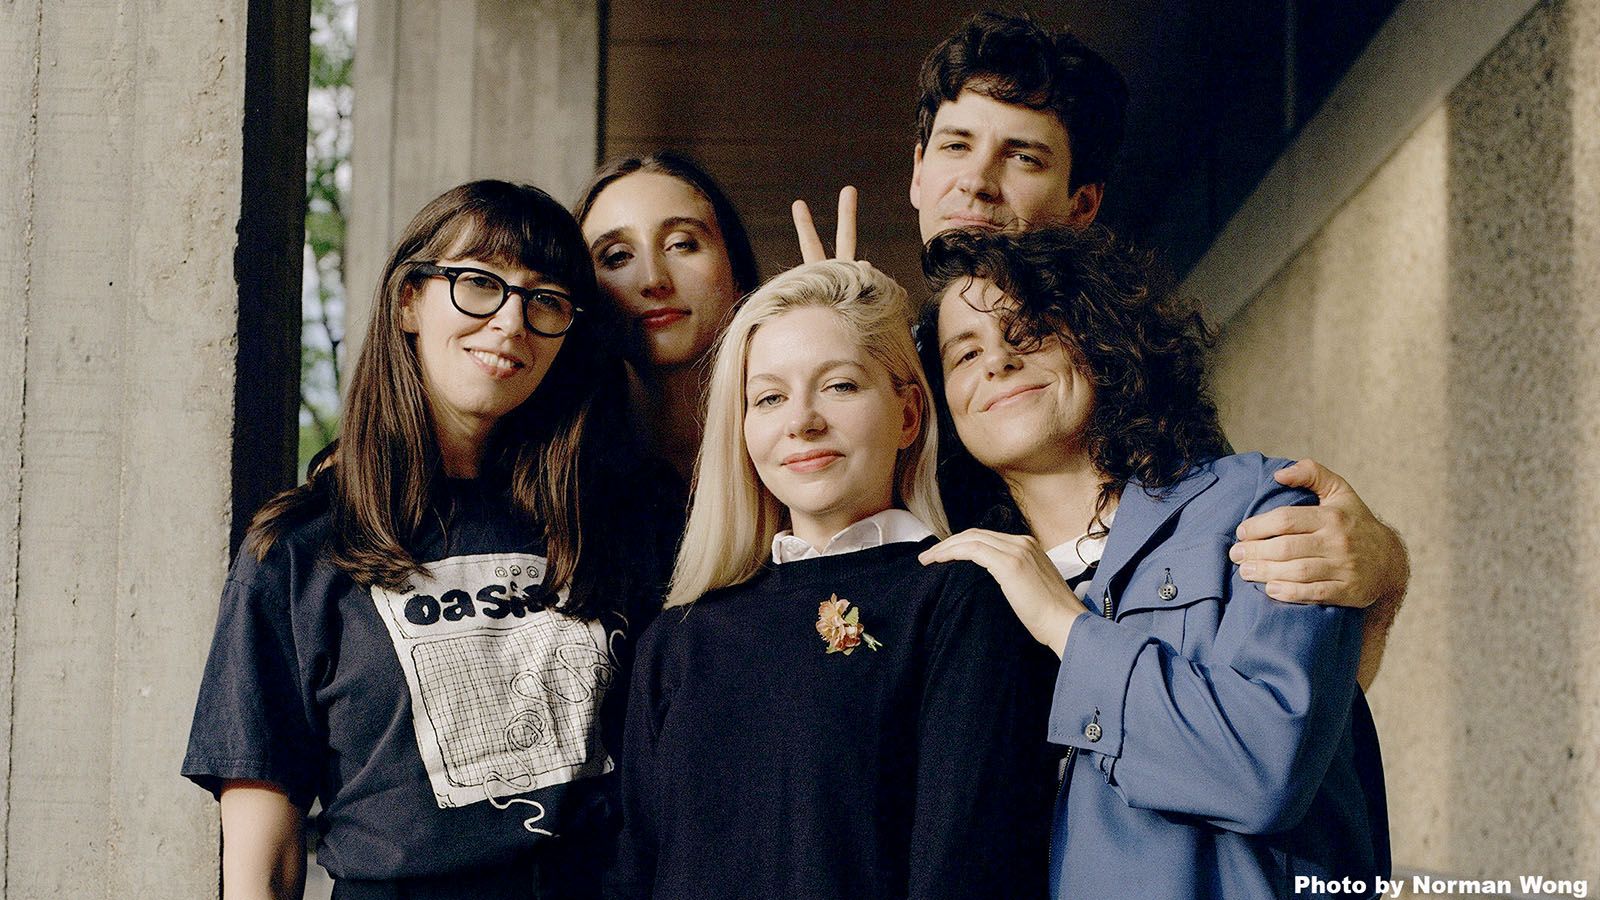 Canadian indie rockers Alvvays will headline Middle Waves Music Festival on June 15 at Parkview Field.